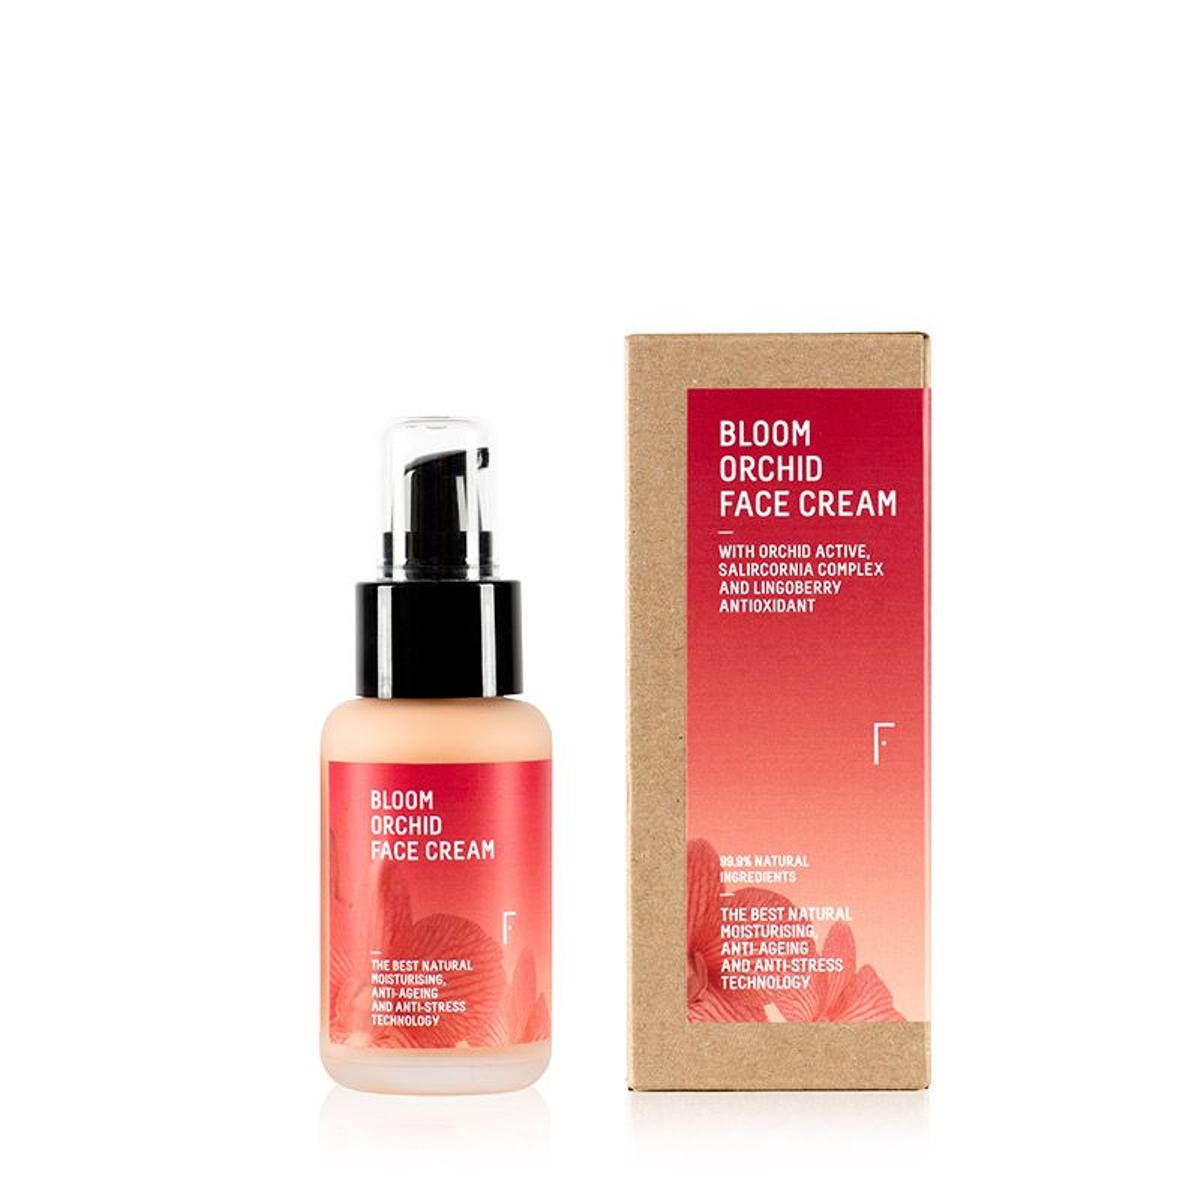 Bloom Orchid Face Cream